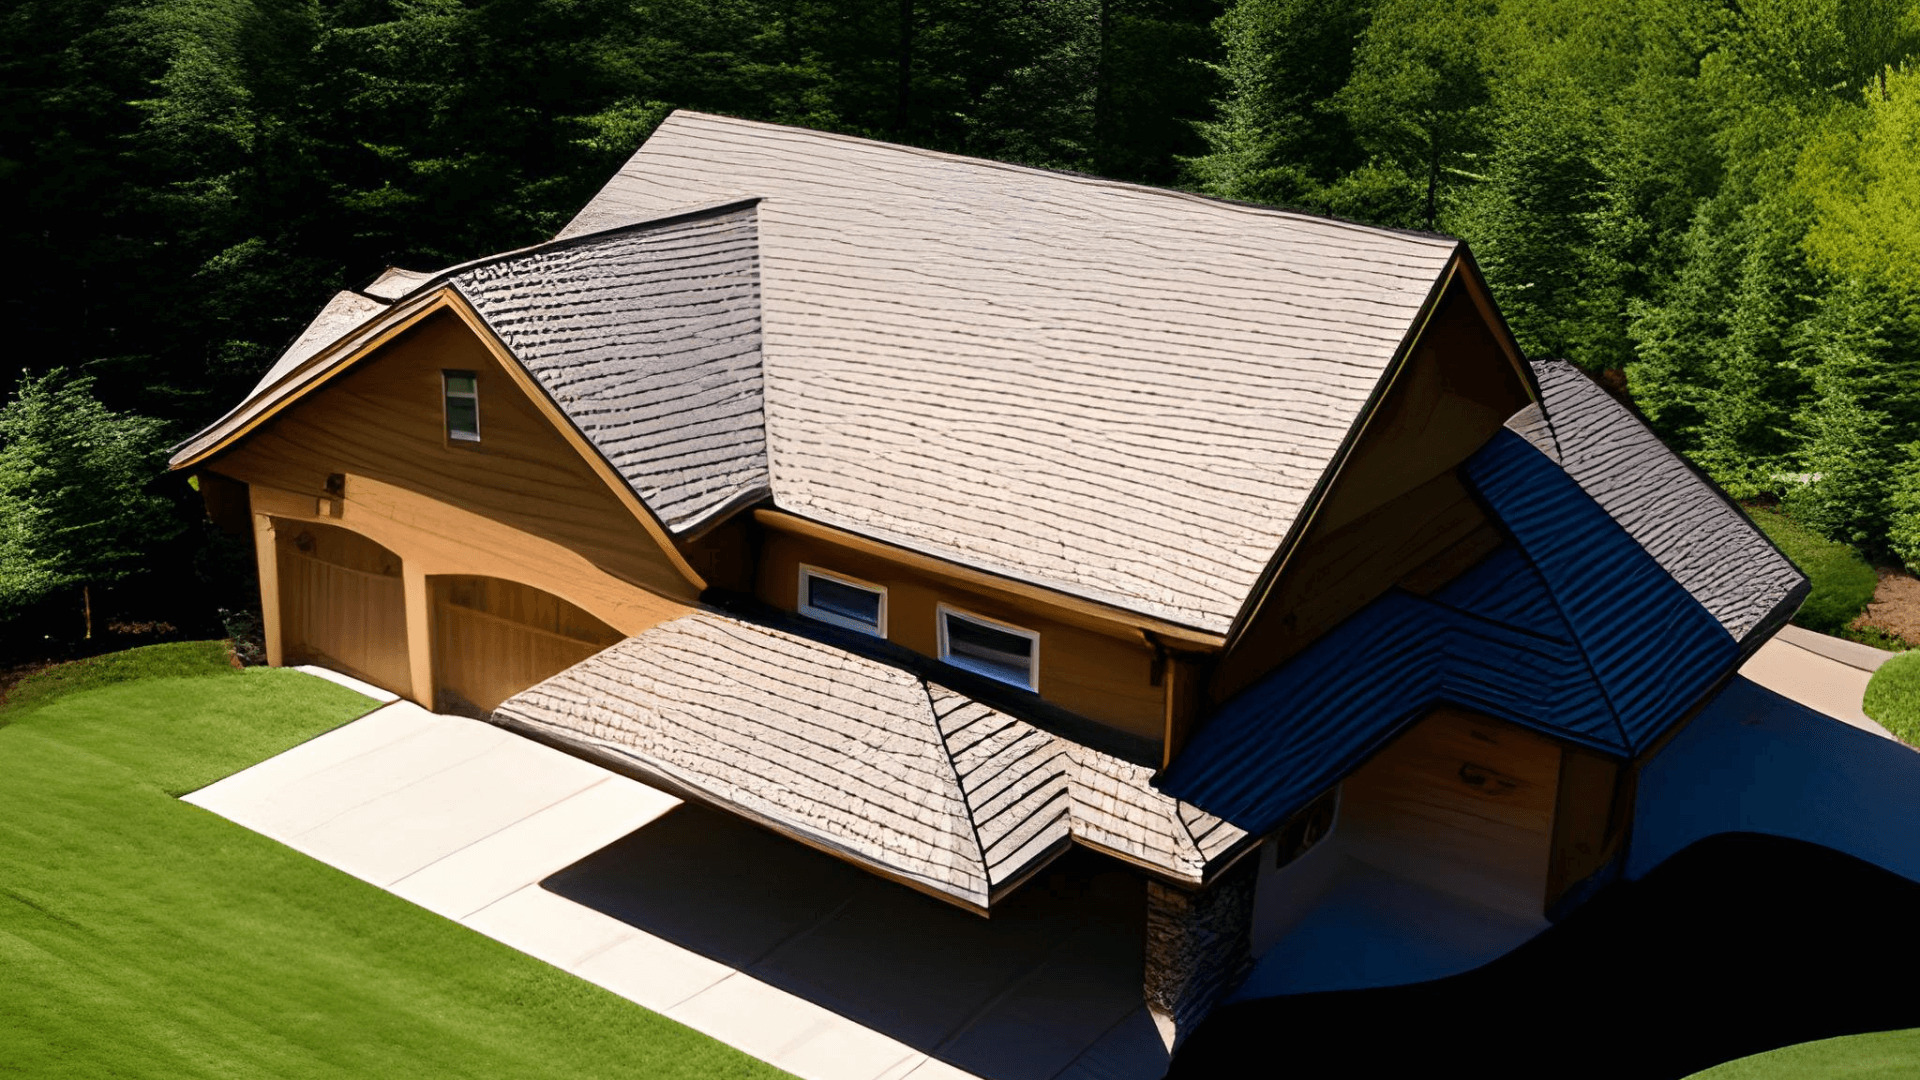 Top view - wood shingles - roofing